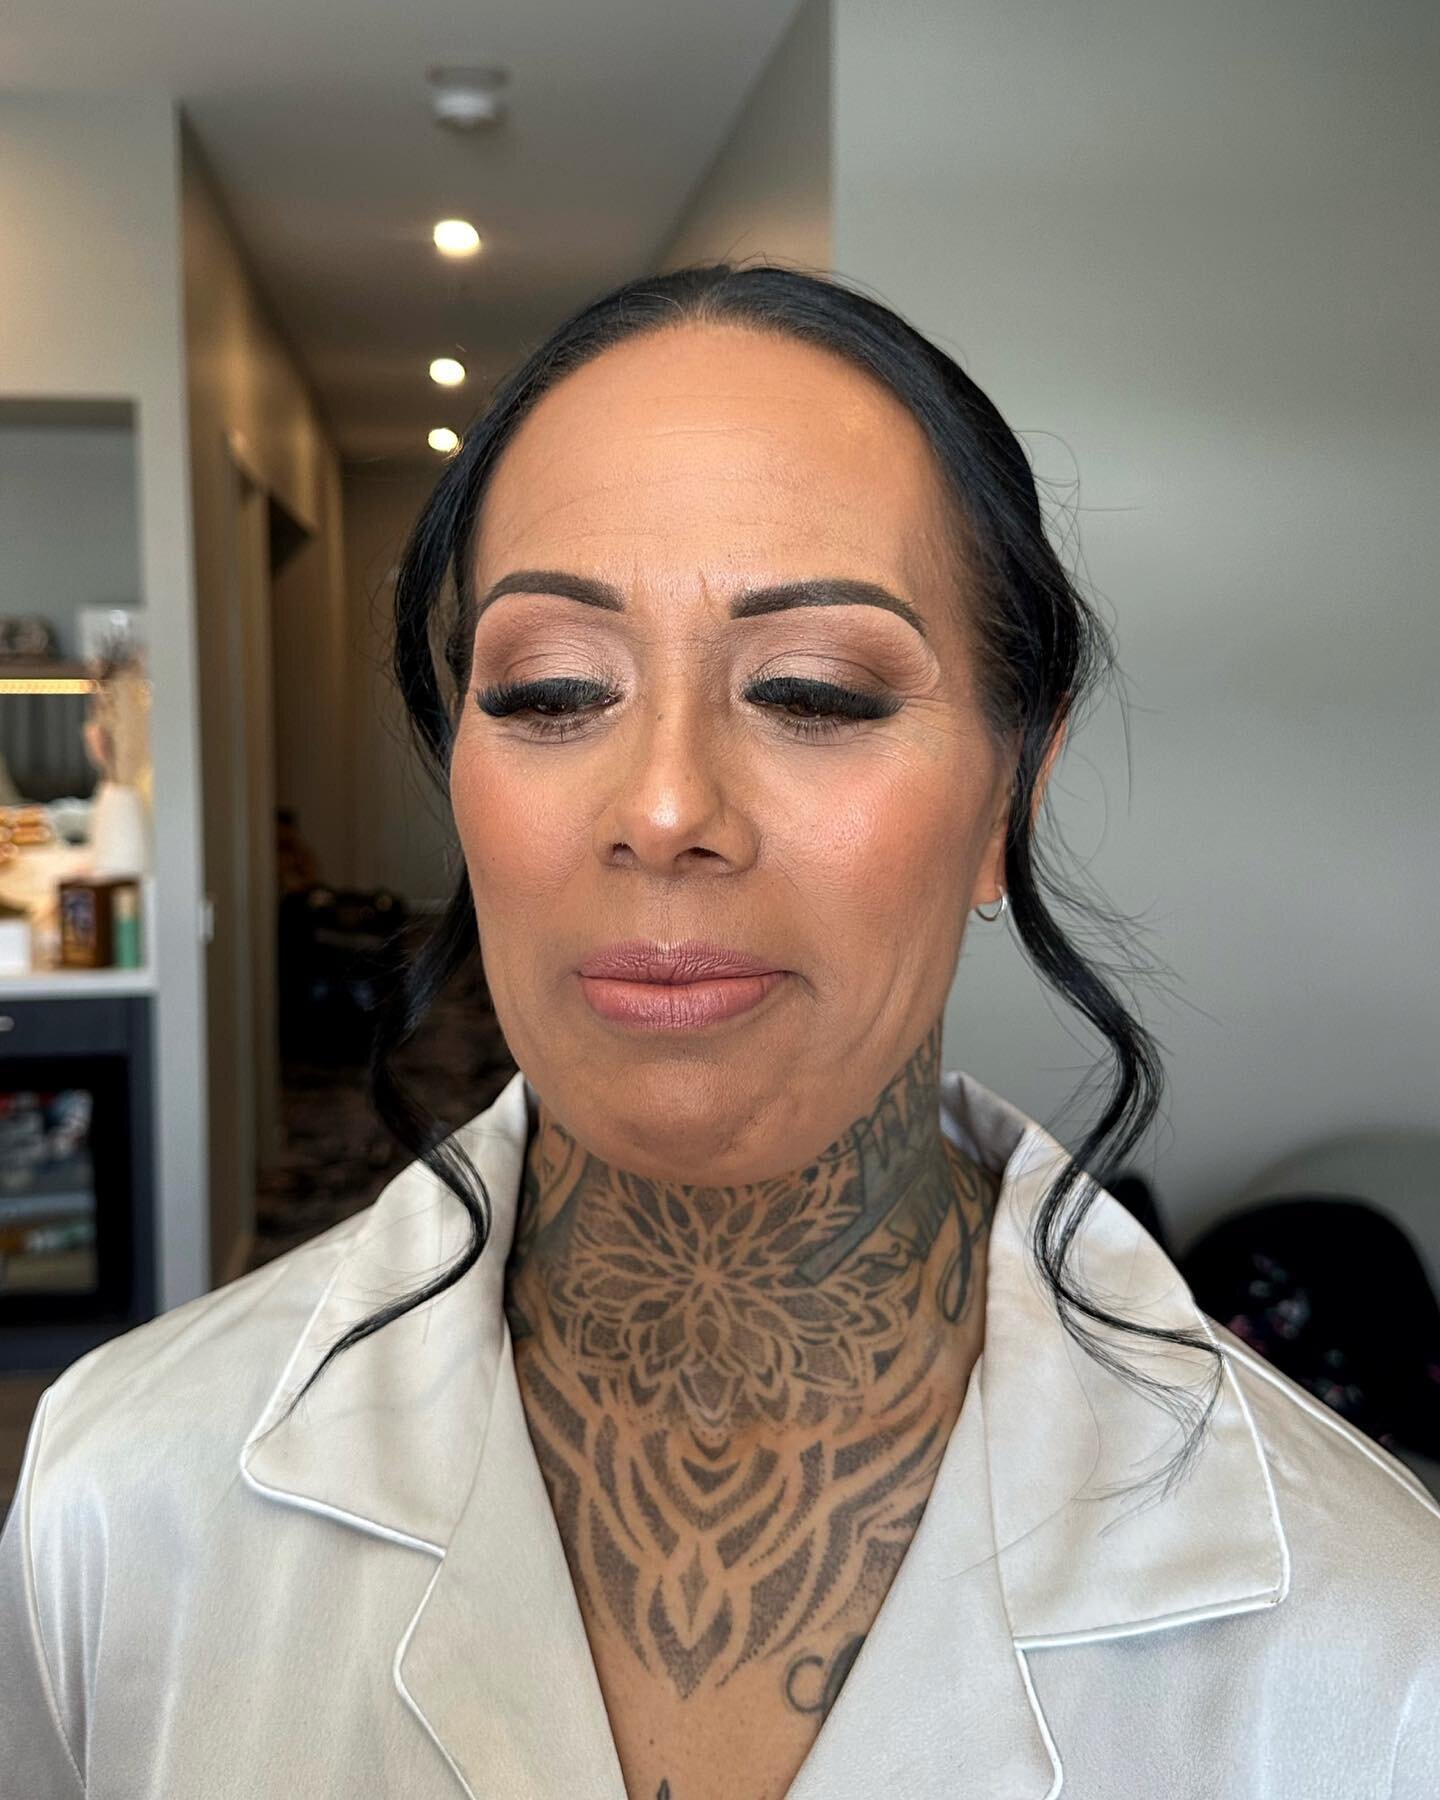 Matte bridal vibes are always a yes from me! 😍

Bookings are open for the rest of the year and for bridal 2024 get in quick ladies!

#mua #melbournemua #glam #makeupartist